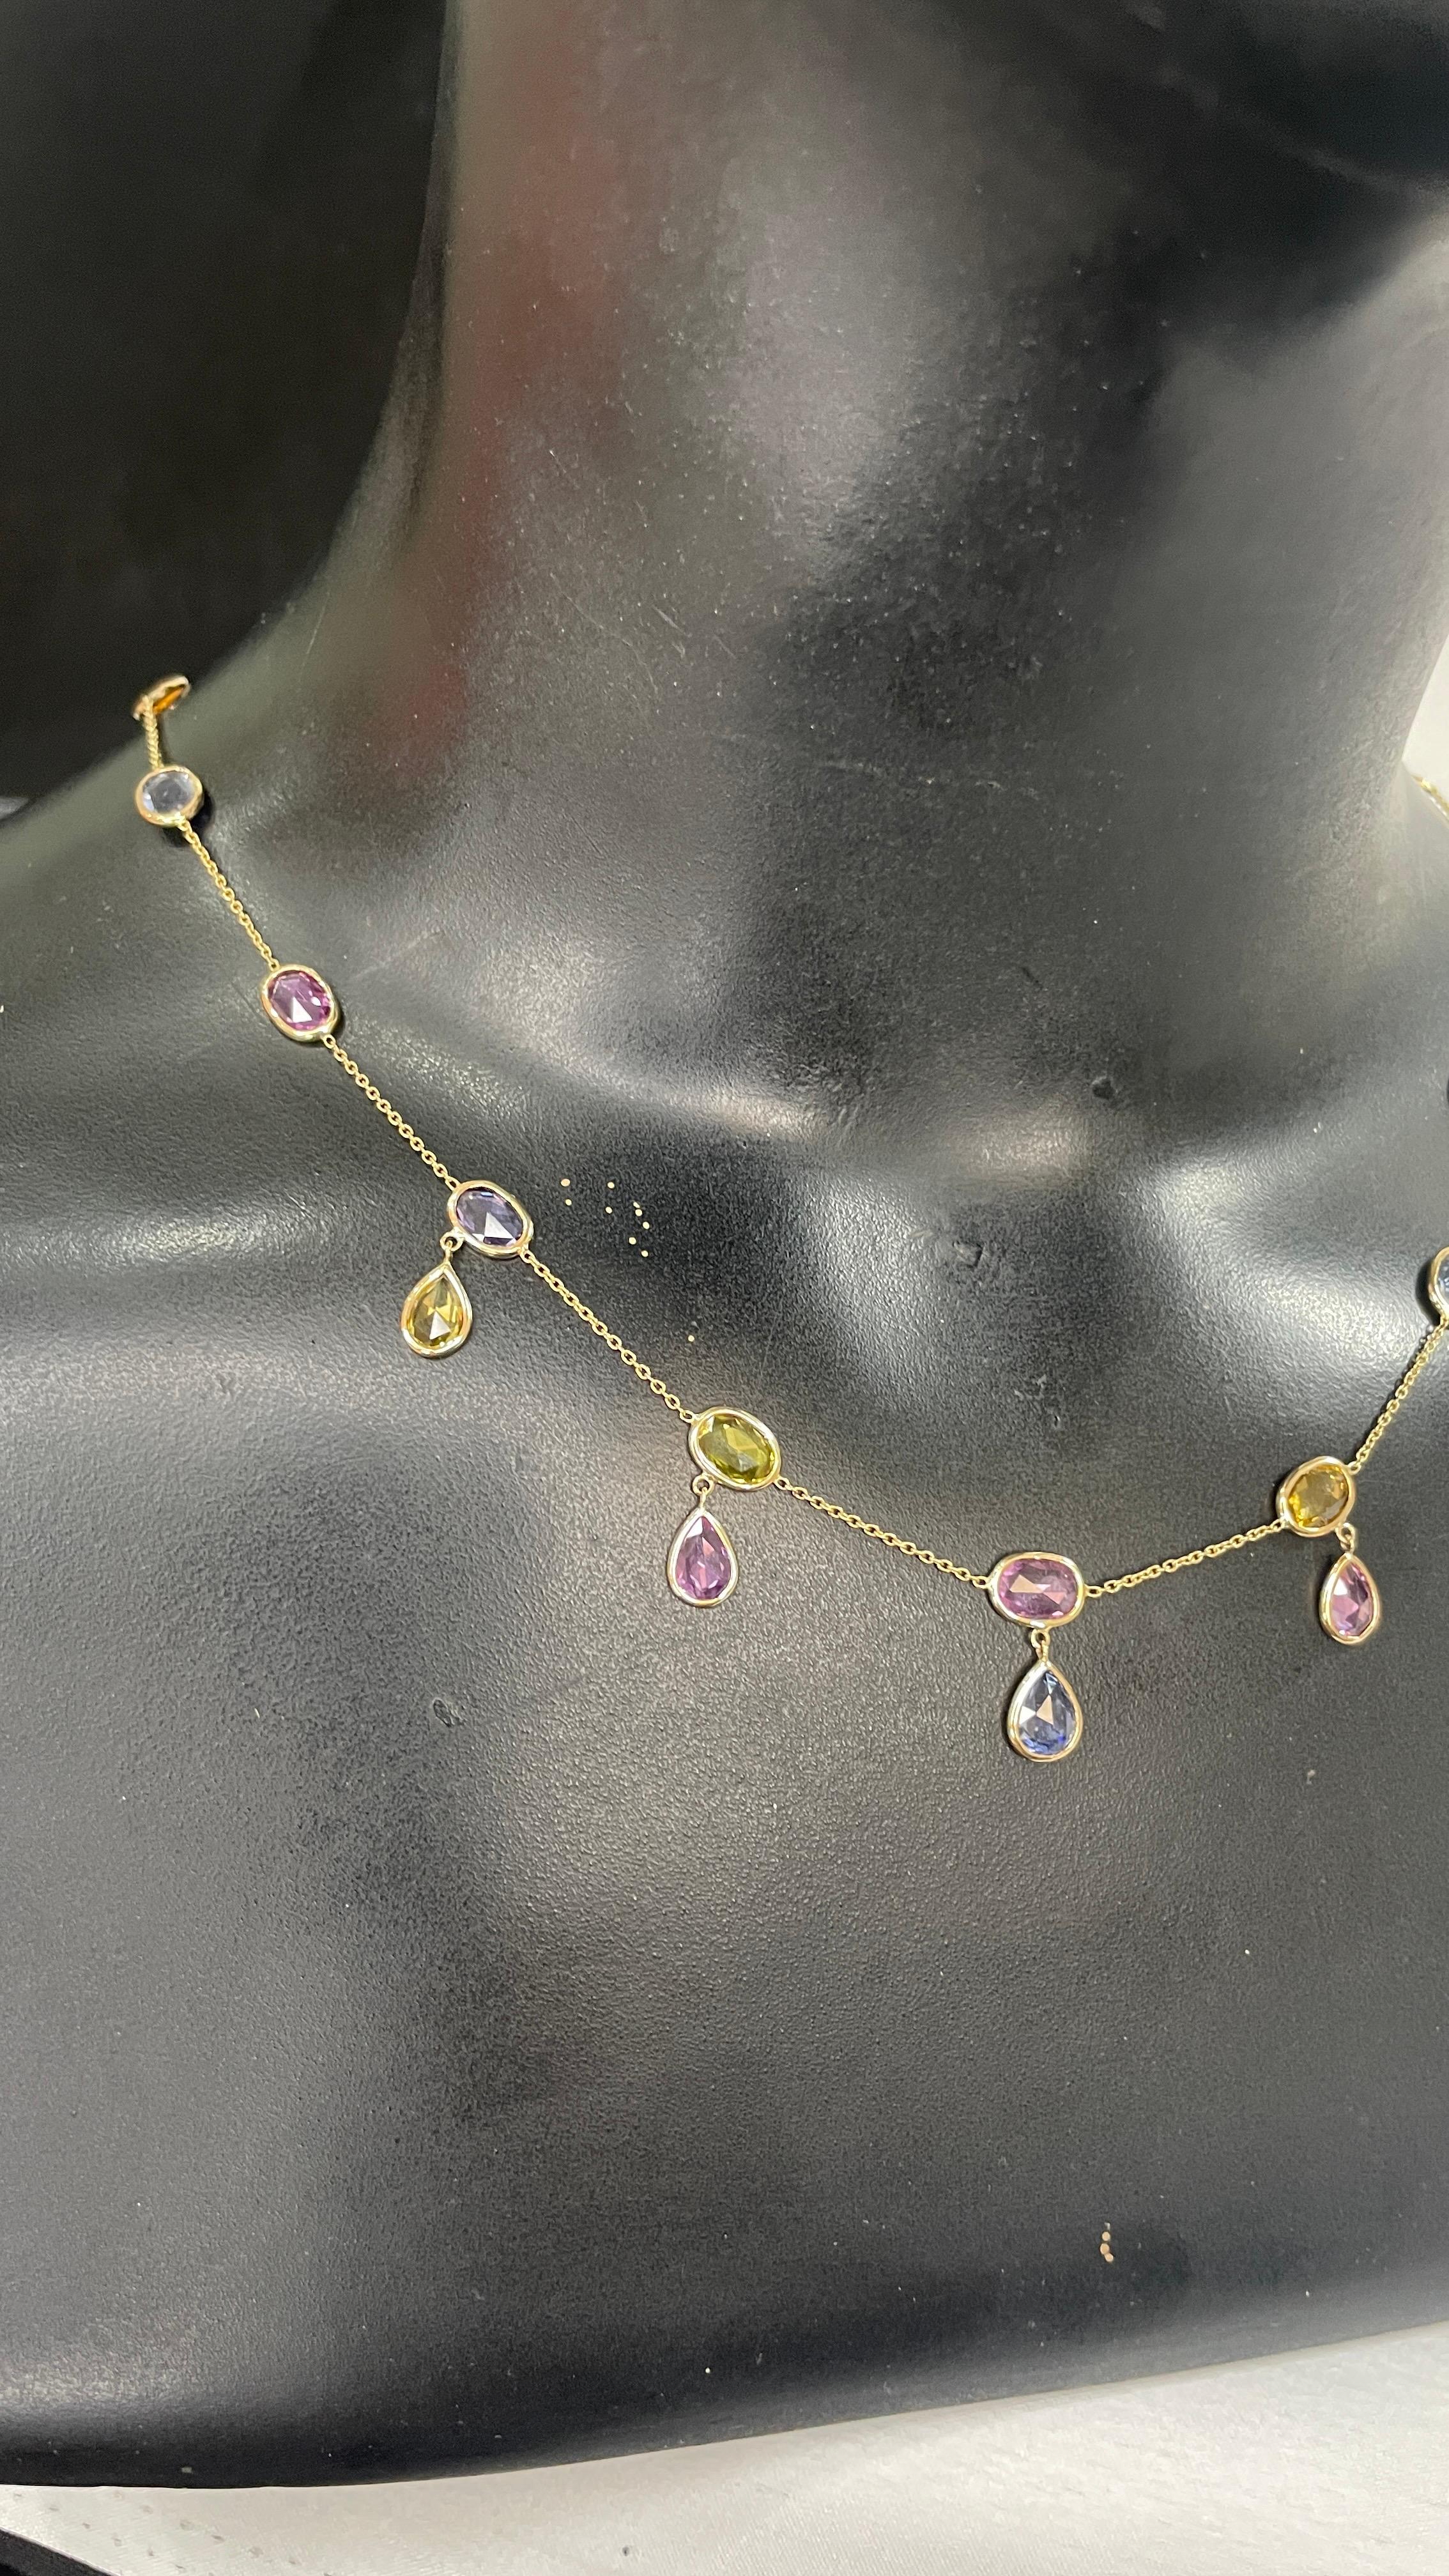 Multi Gemstone Necklace in 18K Gold studded with oval, pear cut sapphire pieces.
Accessorize your look with this elegant multi gemstone chain and drop necklace. This stunning piece of jewelry instantly elevates a casual look or dressy outfit.